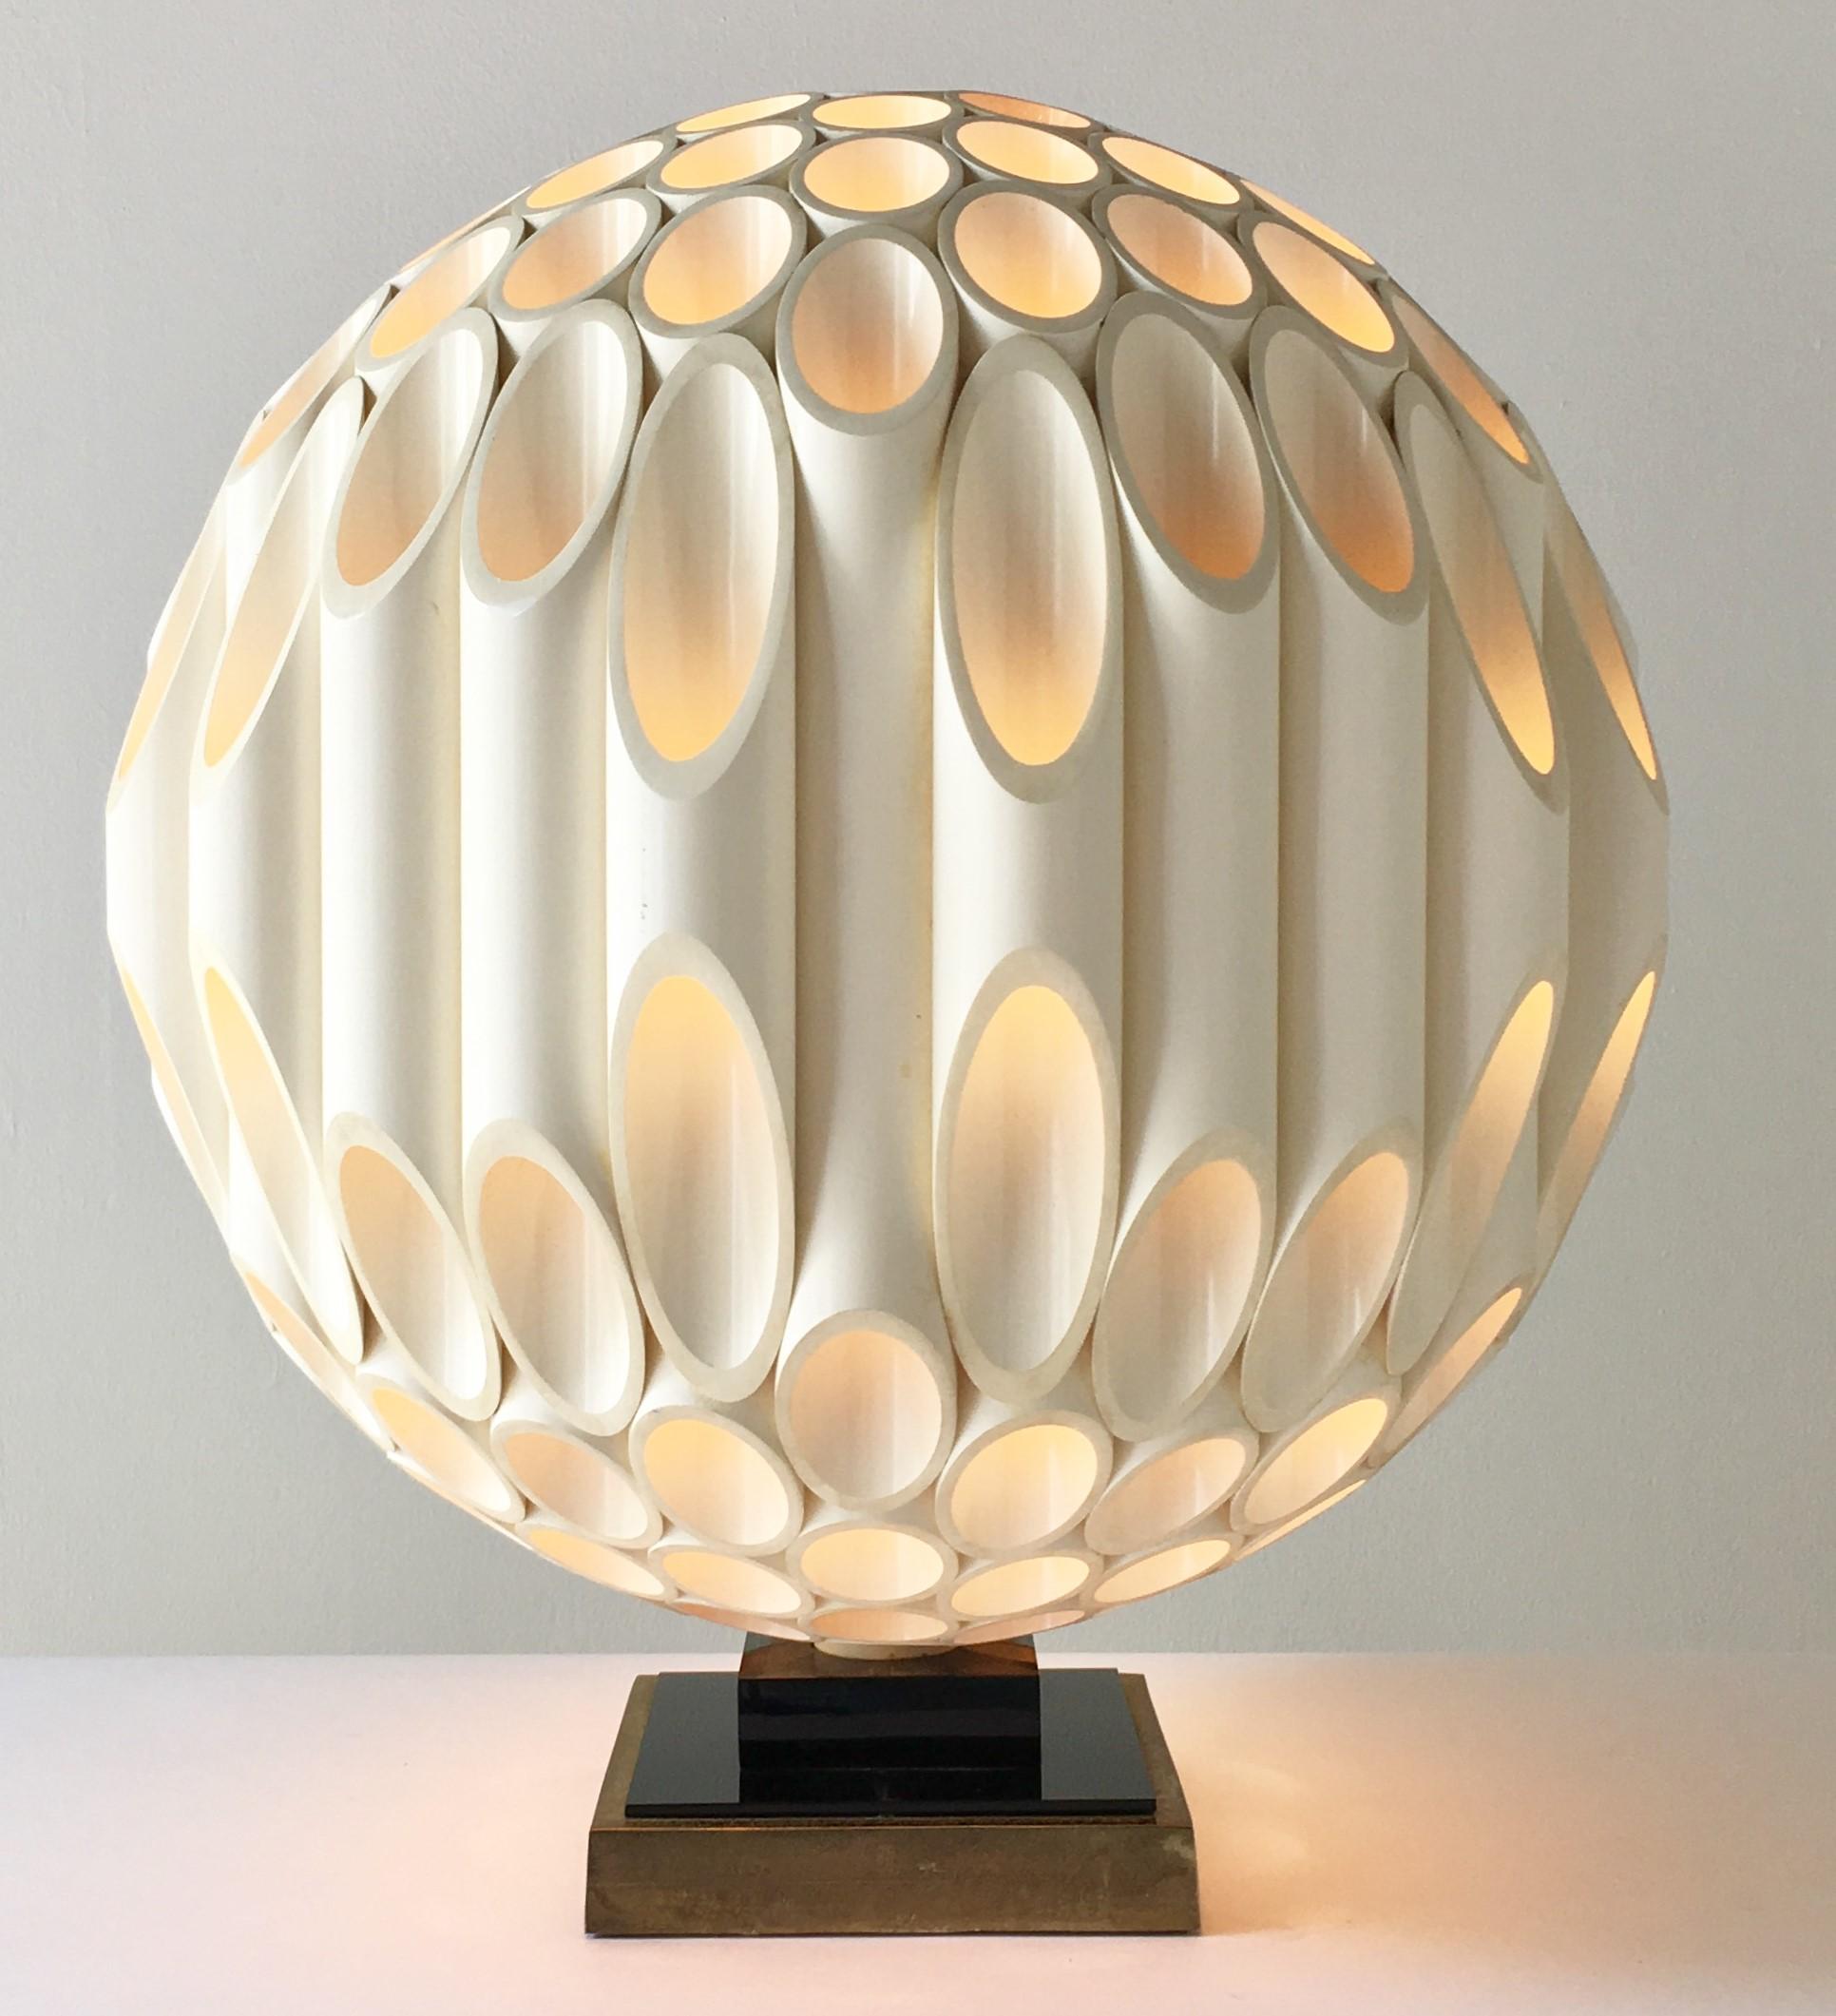 Rare Spherical Rougier Designed Table Lamp Late 1970s, Stamped In Good Condition For Sale In London, GB